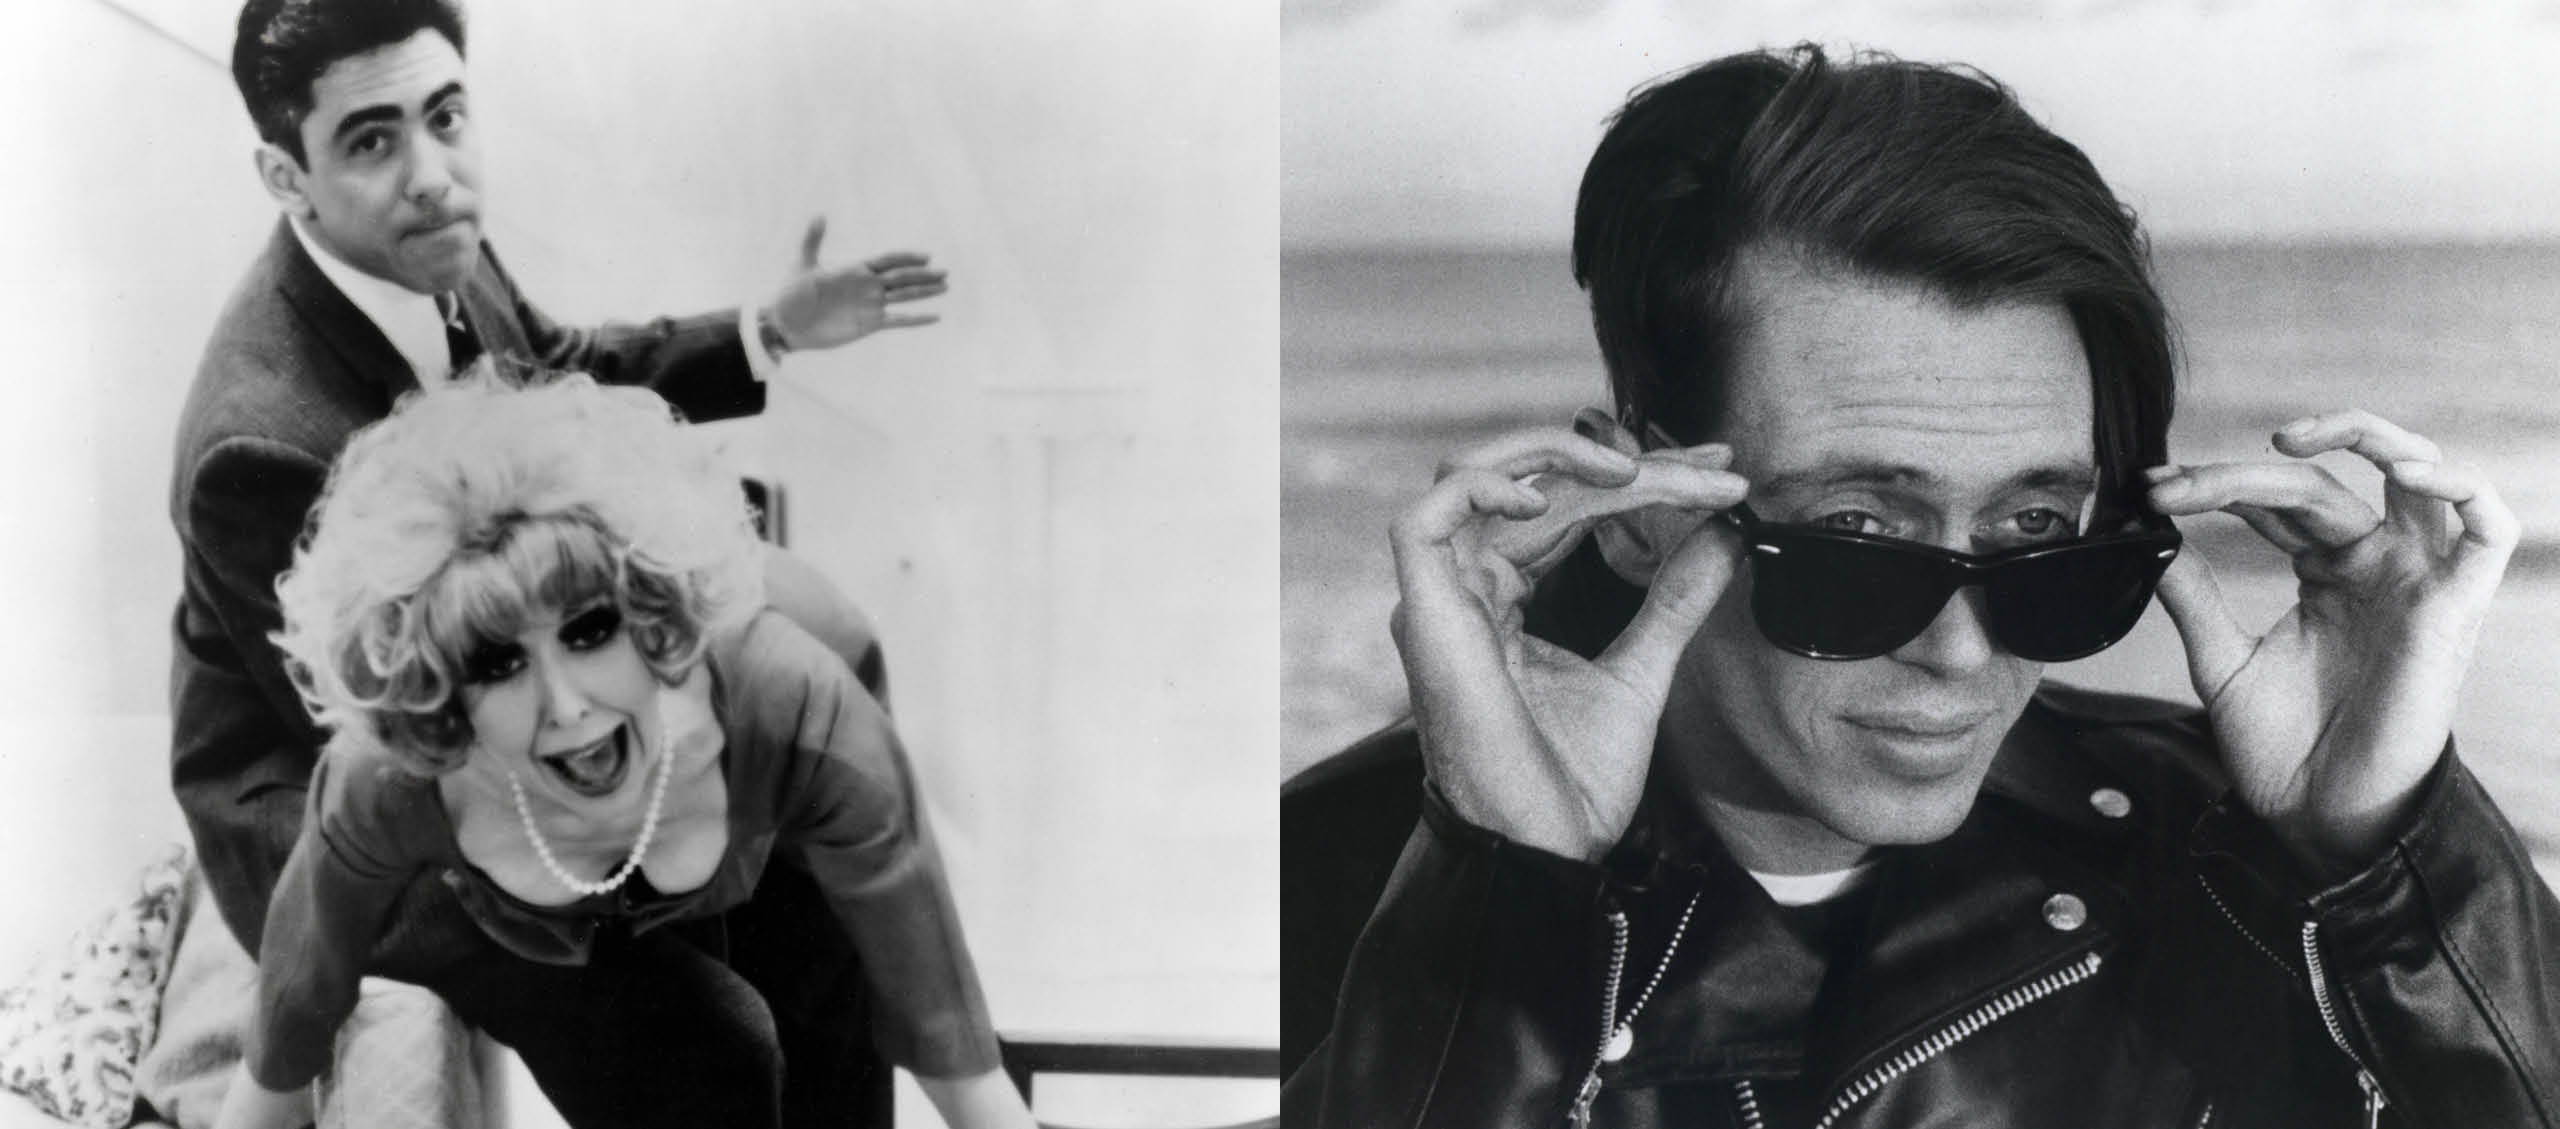 Two black-and-white film stills. On the left, a man holds a woman over his knee to spank her. On the right, a man (Steve Buscemi) wearing a leather jacket peaks over his black sunglasses.